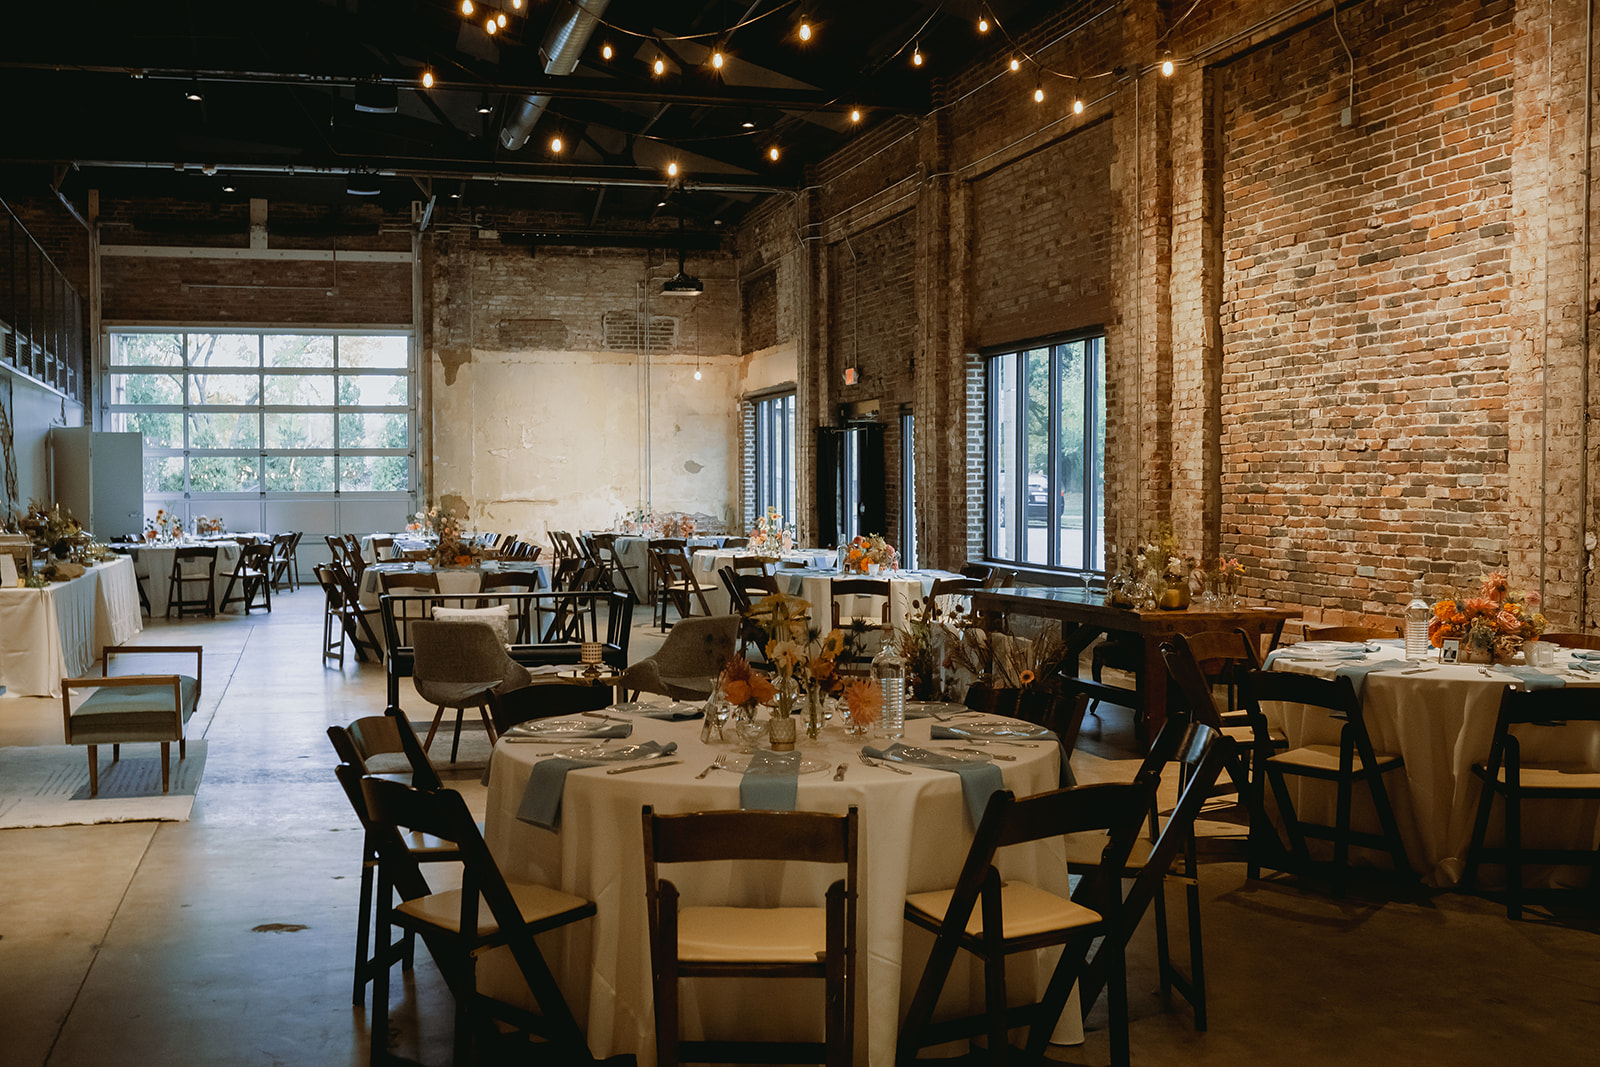 The Best Wedding Venues in St. Louis for Artsy Couples